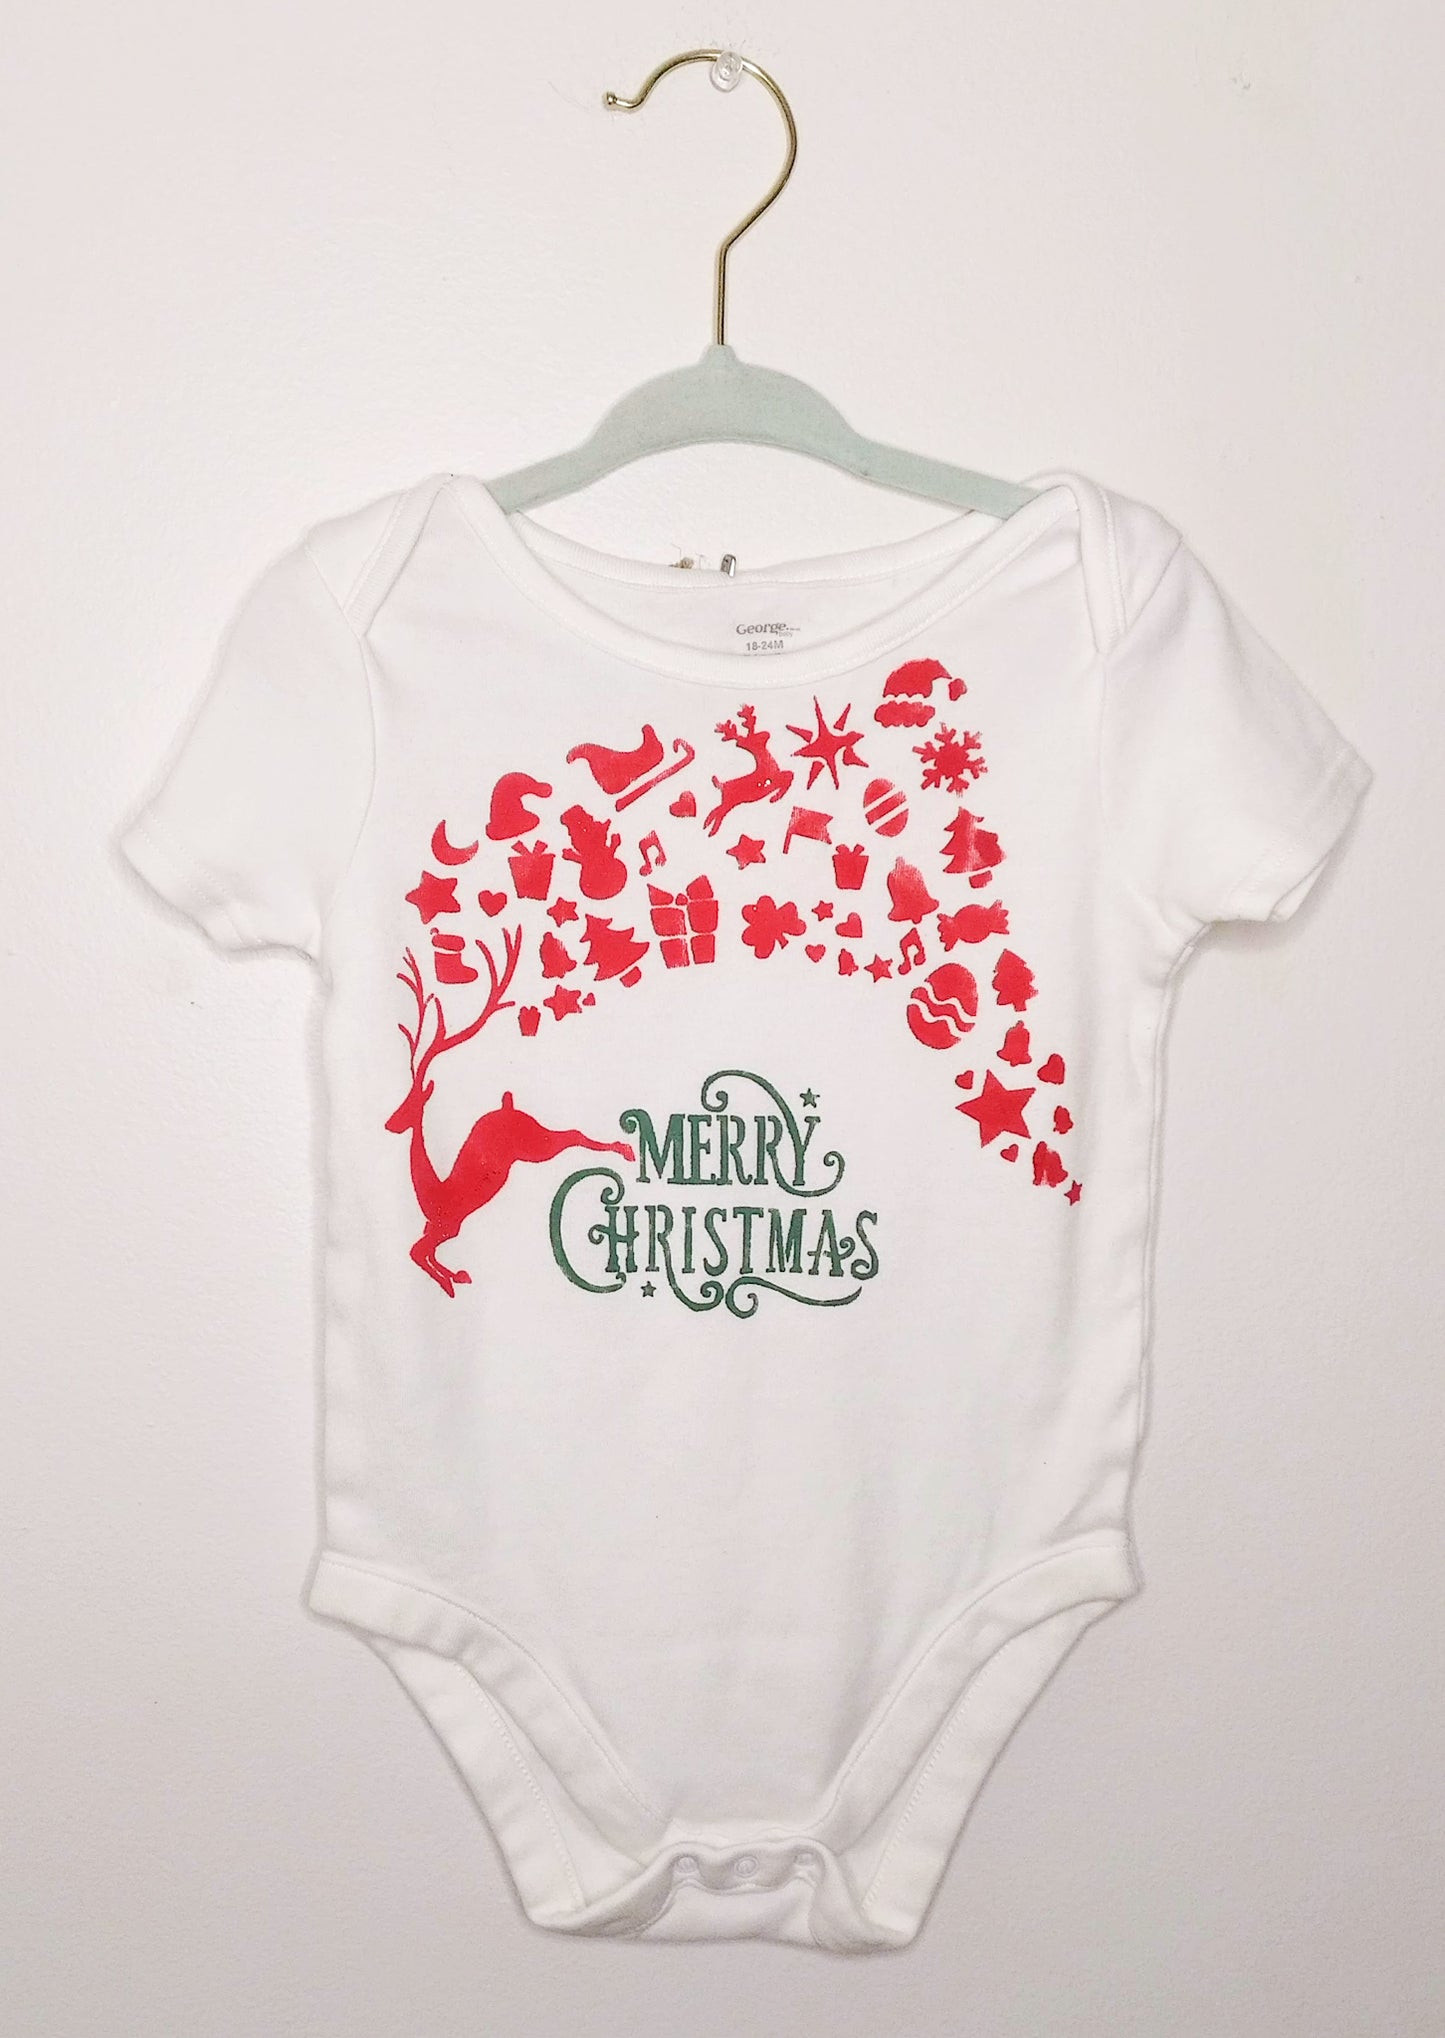 Merry Christmas Reindeer Star Upcycled Bodysuit by Eco Pretty - 18-24 Months